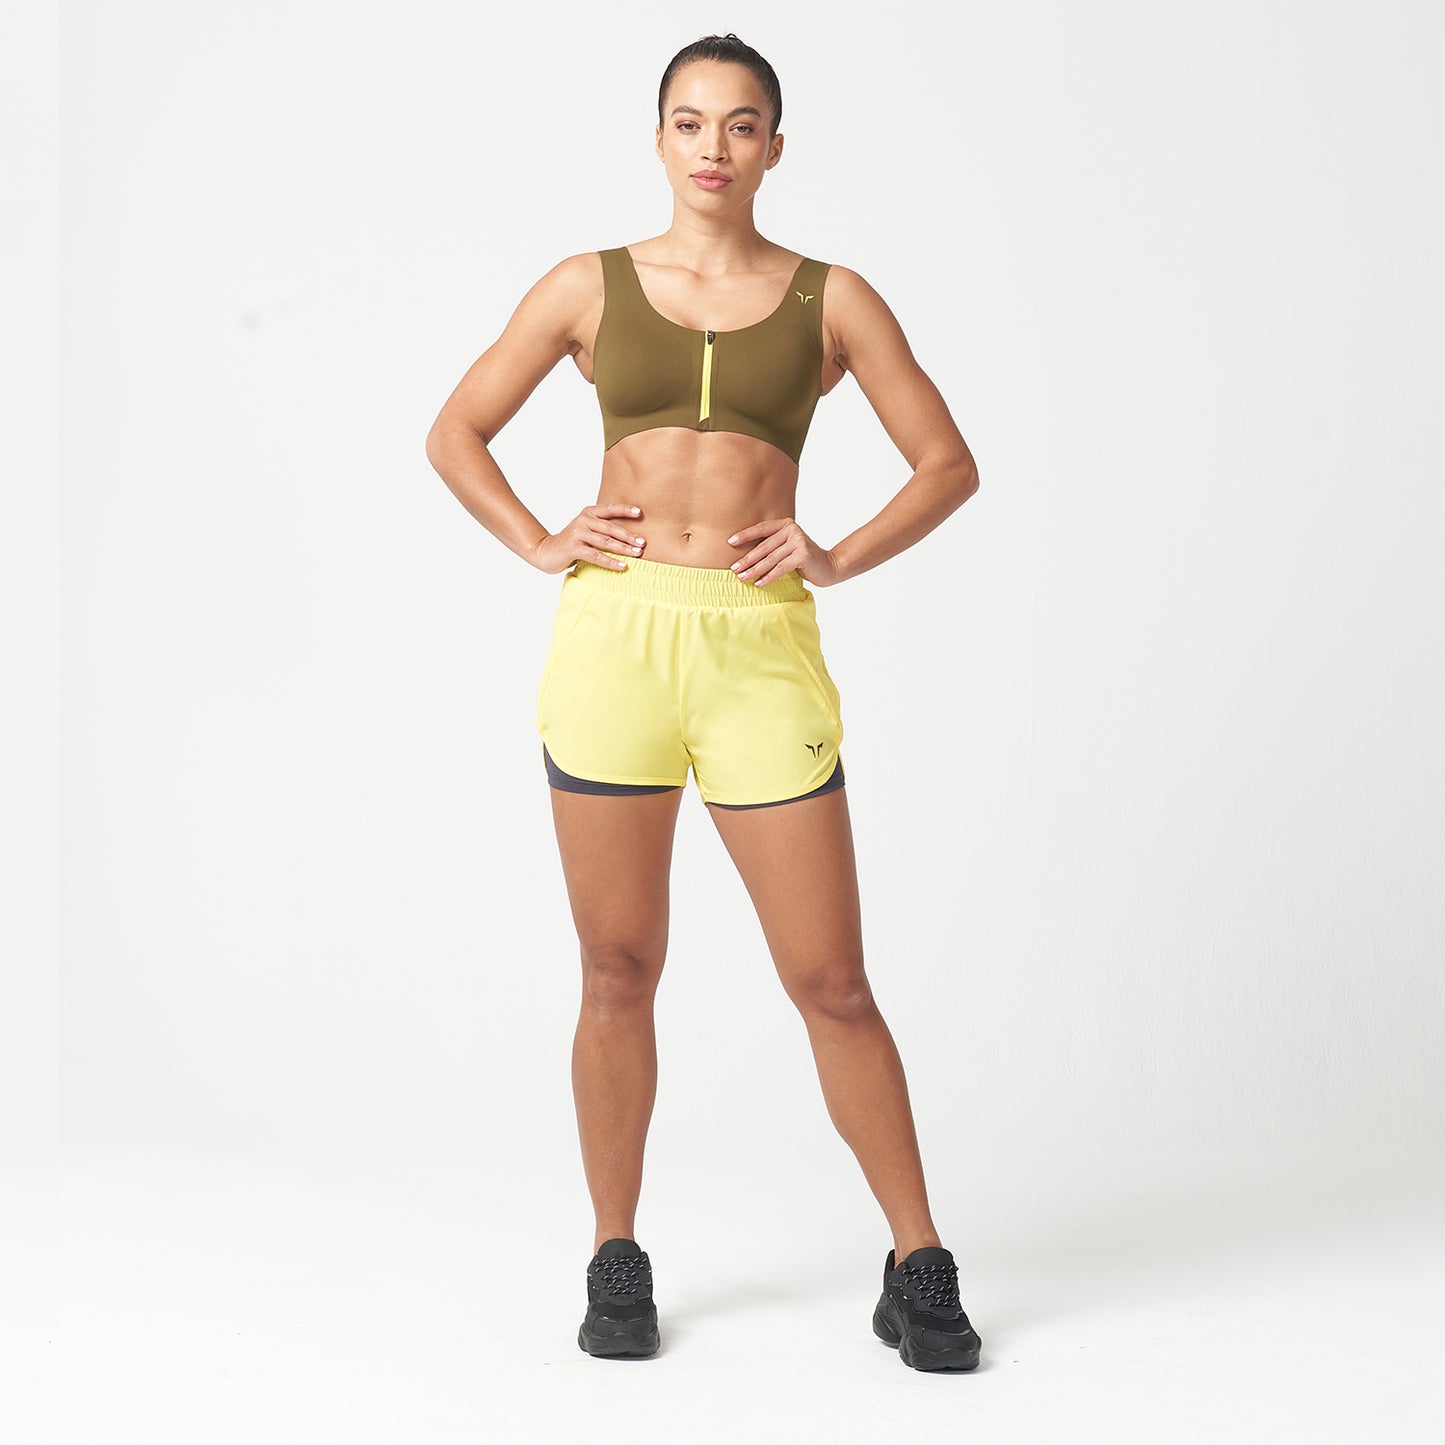 squatwolf-workout-clothes-lab360-never-stop-2-In-1-shorts-yellow-gym-shorts-for-women